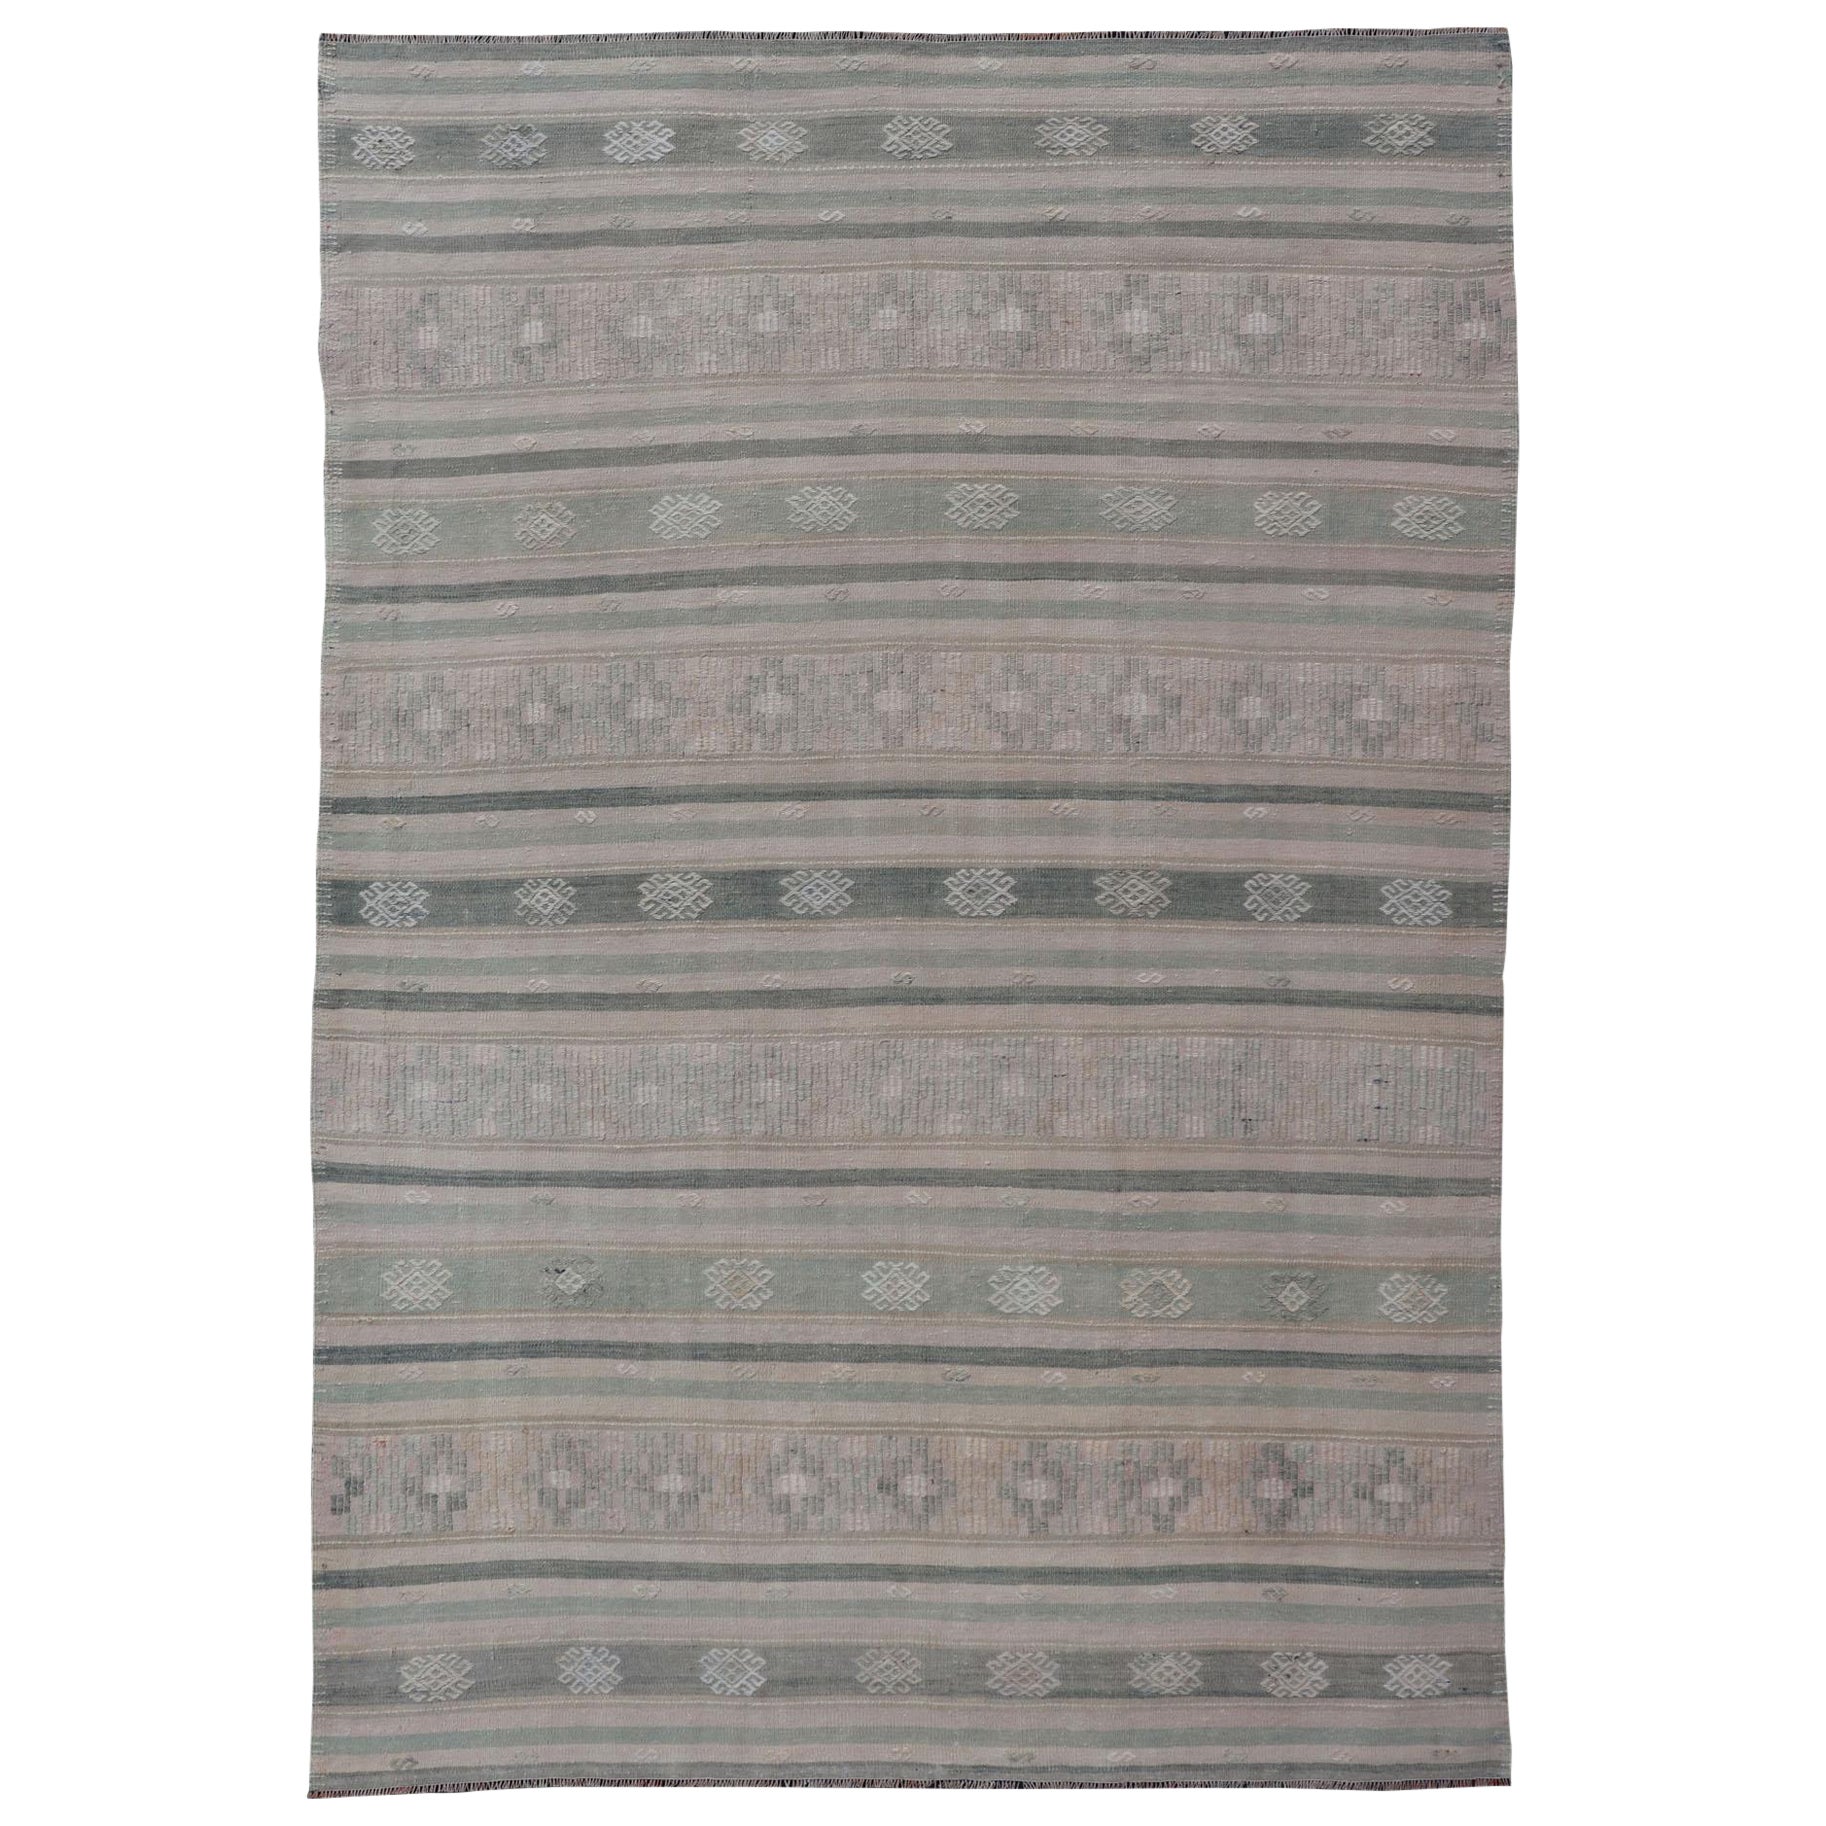 Flat-Weave Hand Woven Kilim with Embroideries in Taupe, Tan, Blue and Gray